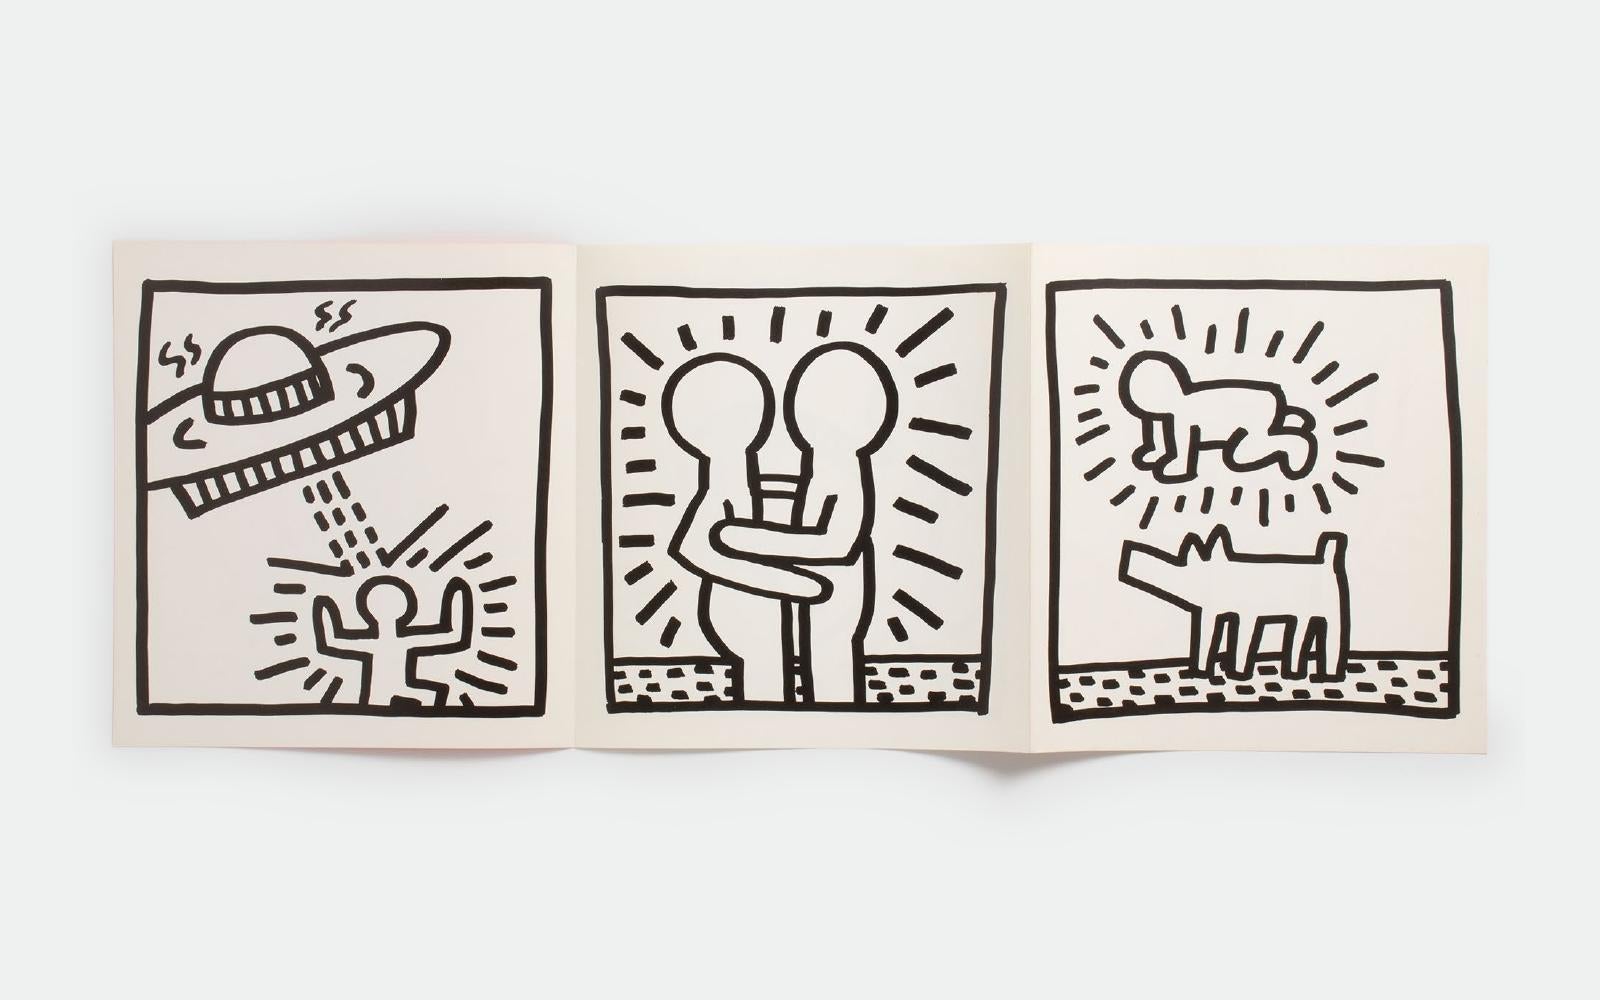 Keith Haring Galerie Paul Maenz, Cologne, Germany 1984:
Super rare, tri-fold poster booklet published to announce Haring’s 1984 solo exhibition at Paul Maenz Gallery in Cologne (Haring's 1st solo show in Germany). A must have Haring collectible from